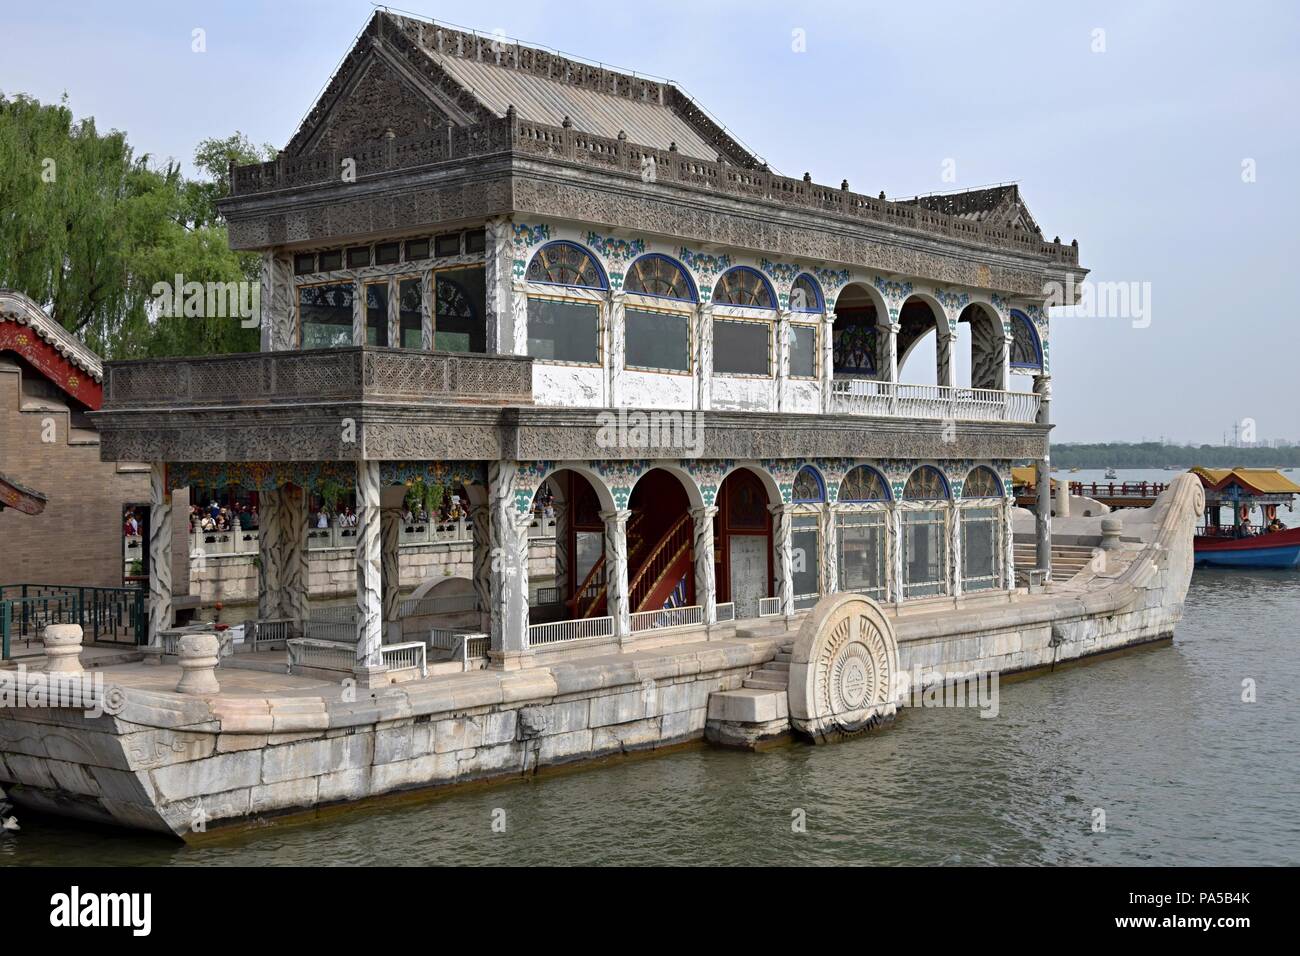 The Stone Boat erected on the Kunming Lake on the grounds of the Summer Palace in Beijing. Stock Photo